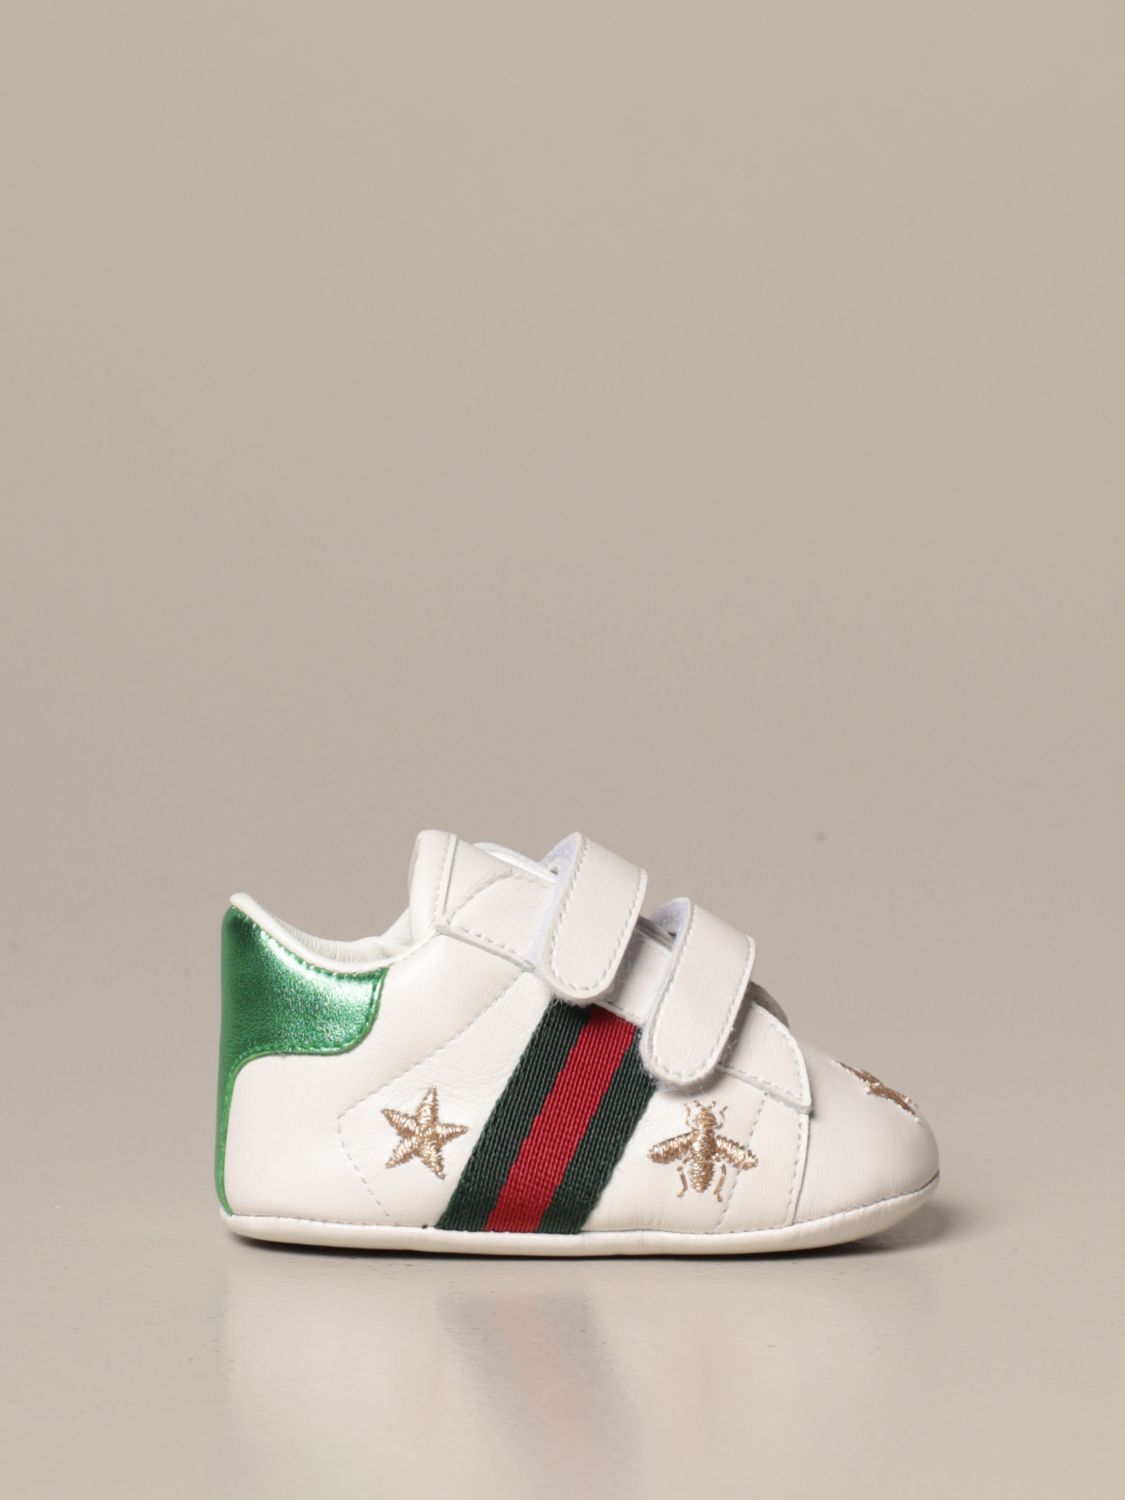 GUCCI: New Ace sneakers in nappa leather with Web bands and lurex  embroidery of Bees and stars - White | Gucci shoes 552926 BKPY0 online on  